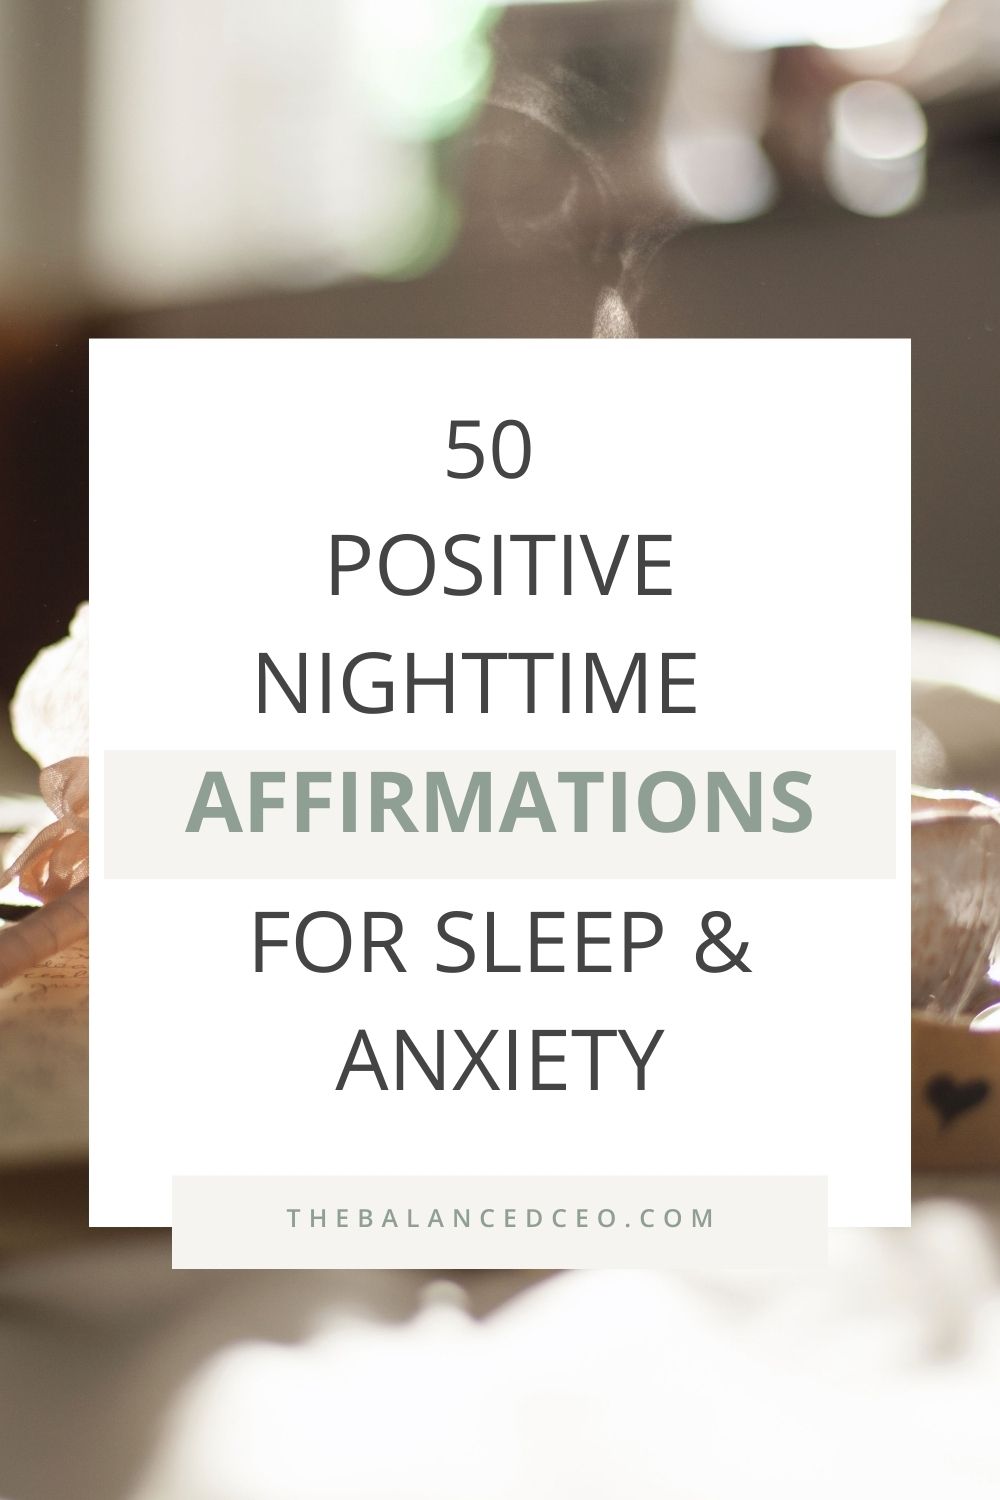 50 Positive Nighttime Affirmations for Sleep & Anxiety